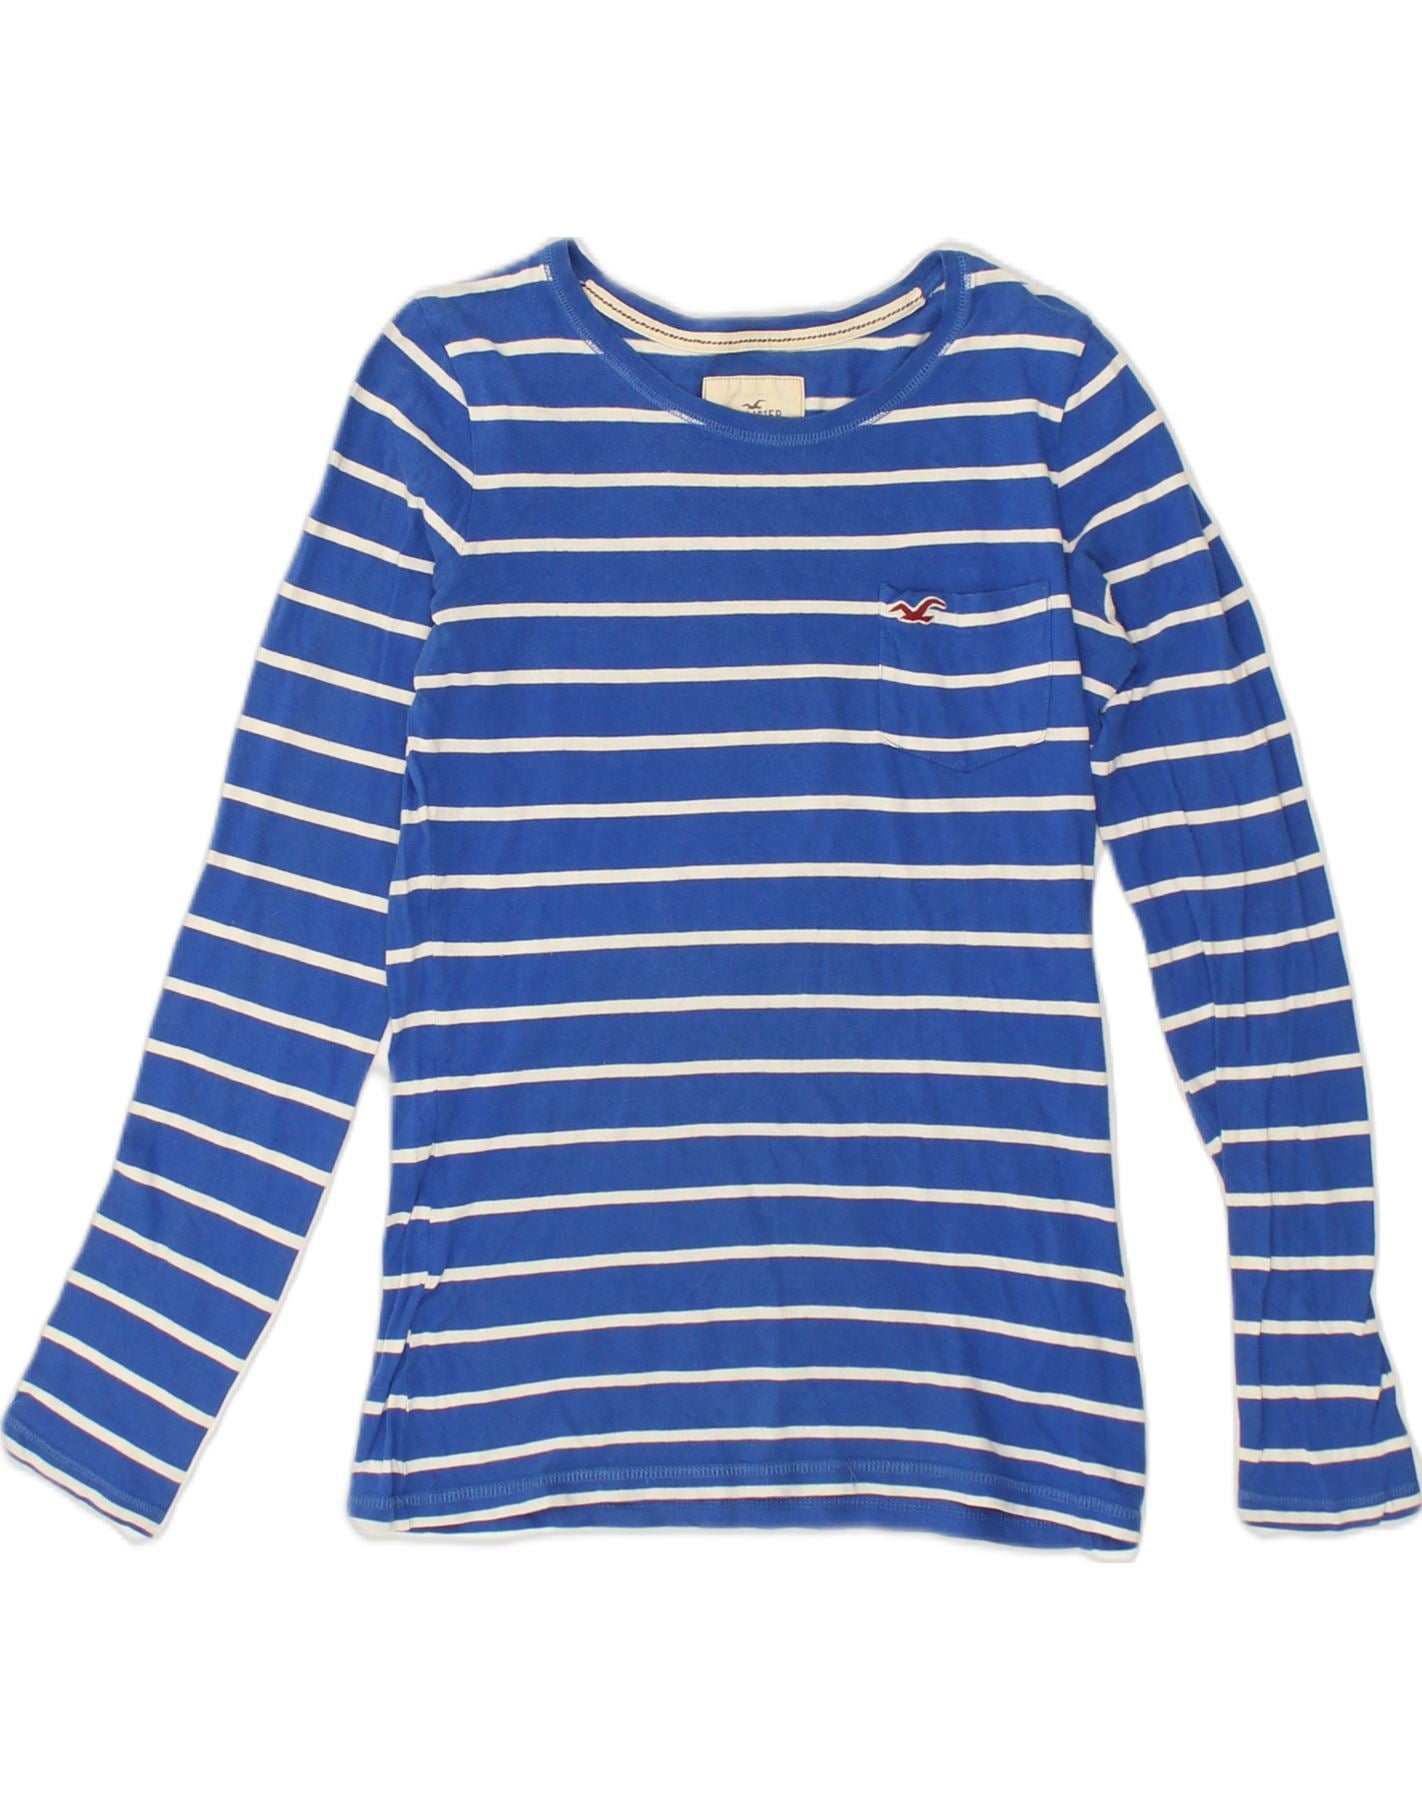 HOLLISTER Womens Top Long Sleeve UK 10 Small Blue Striped Cotton